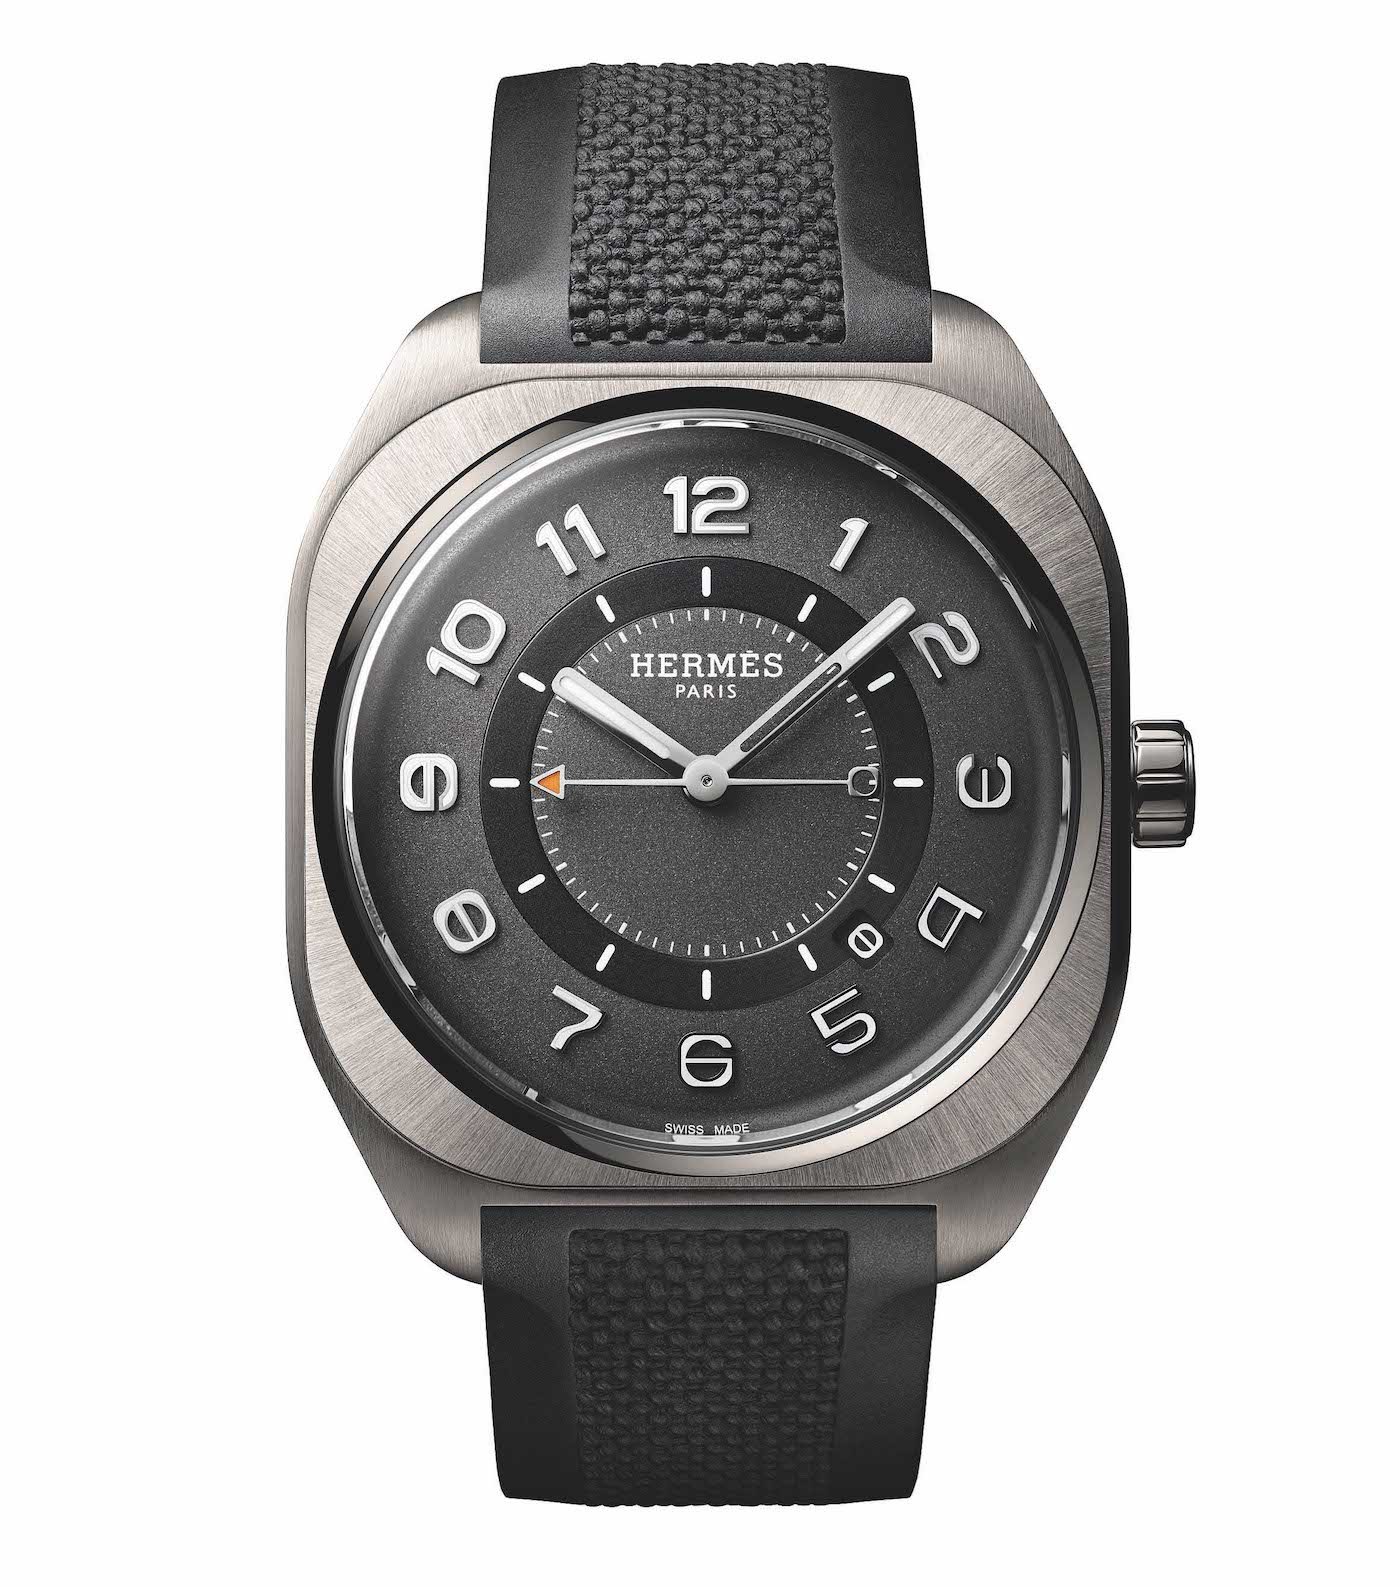 An introduction to the Hermès H08 watch